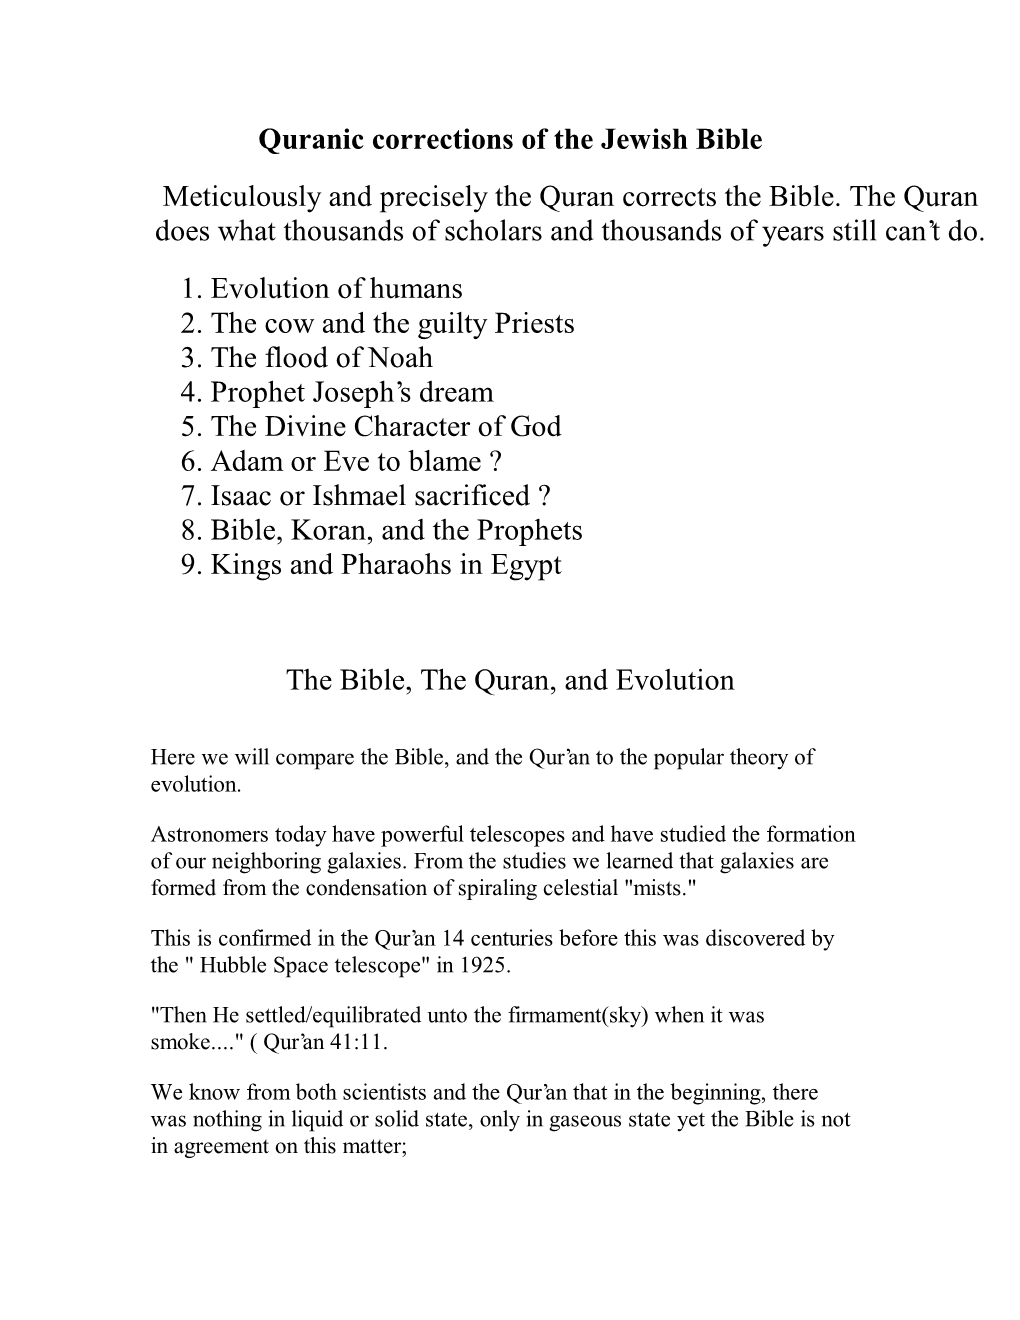 Quranic Corrections of the Jewish Bible Meticulously and Precisely the Quran Corrects the Bible